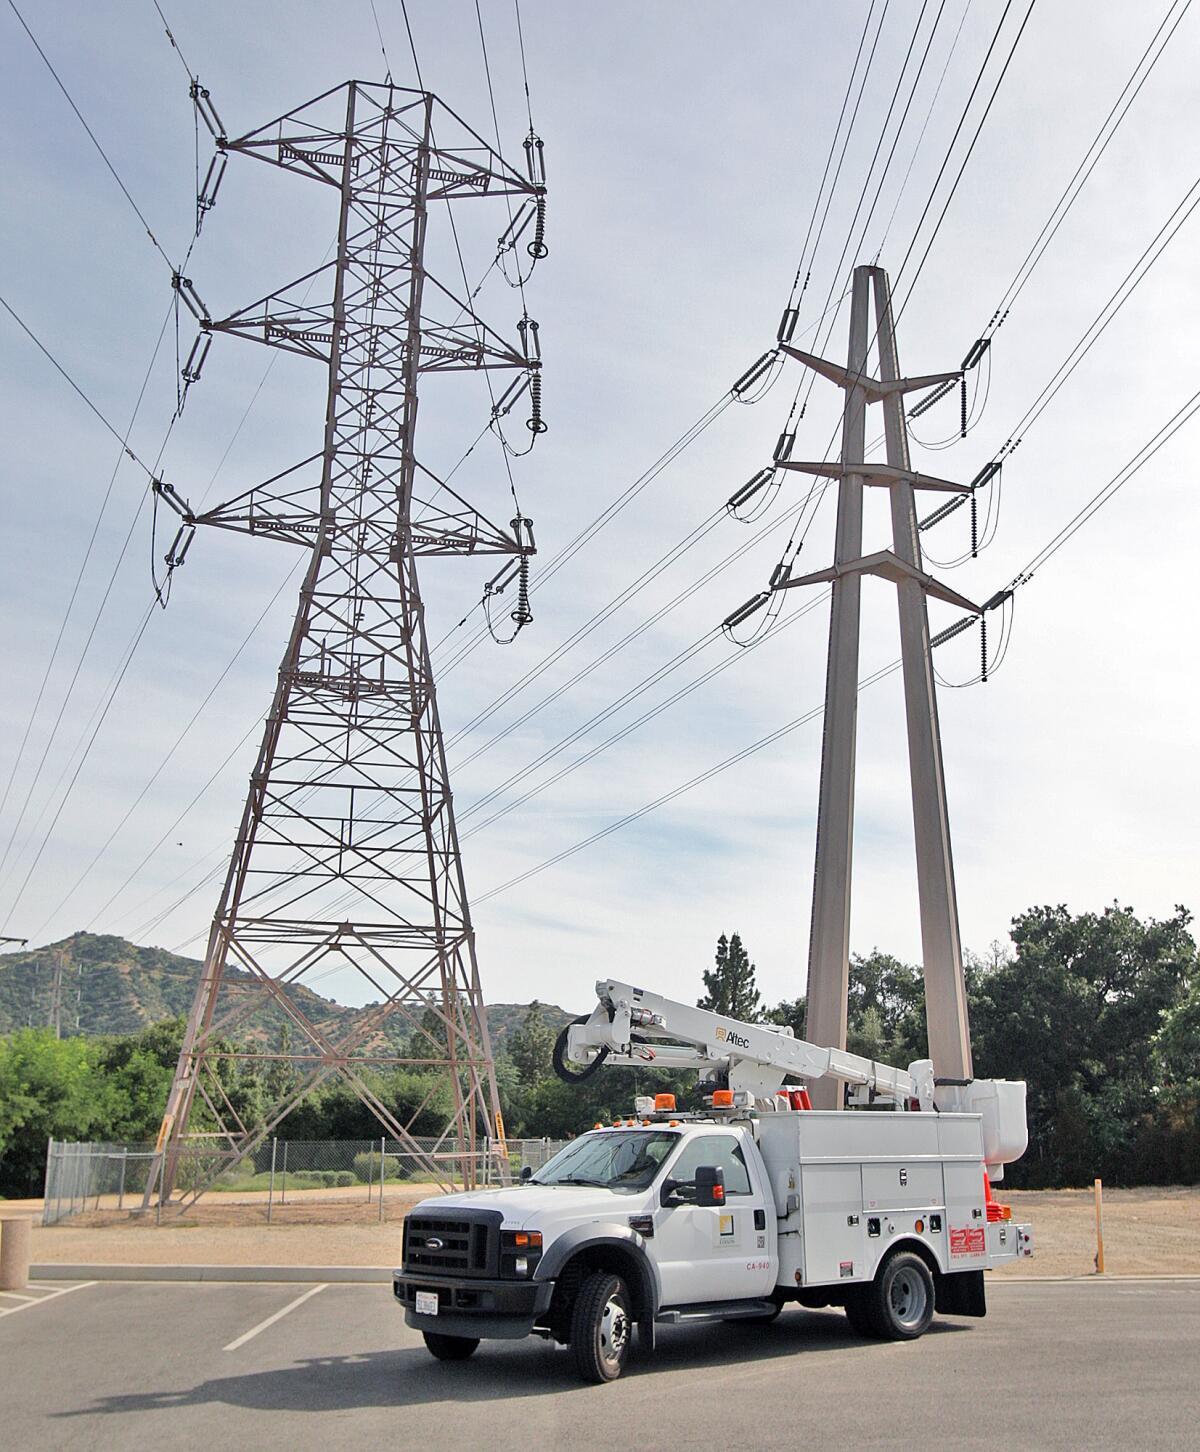 A Southern California Edison utility truck in a parking lot at the 1500 block of Foothill Blvd. in La Cañada Flintridge on Tuesday, May 3, 2016.